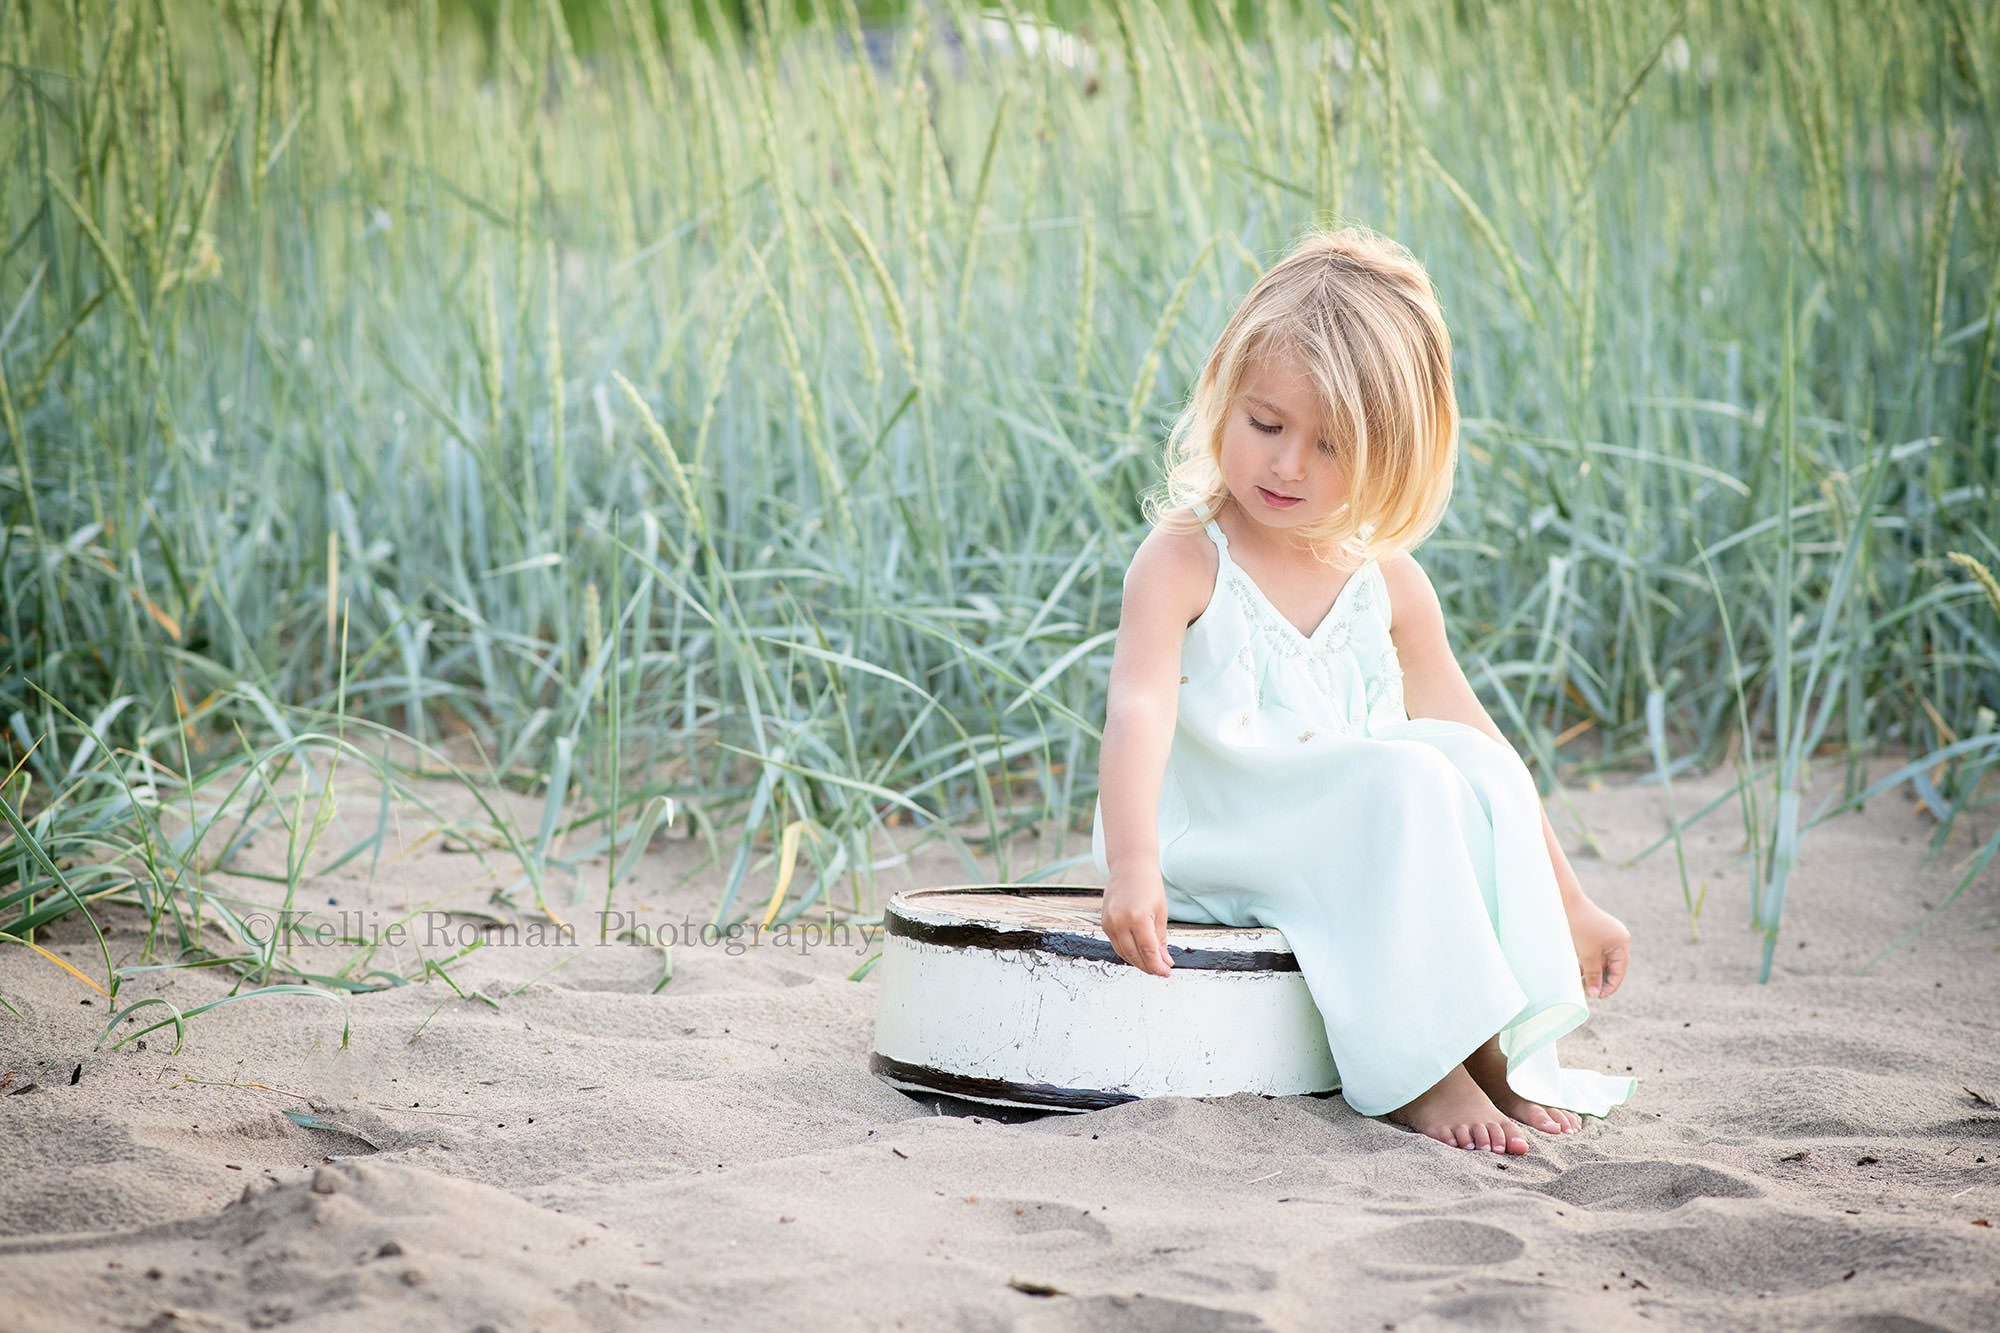 beach colors a shot of a toddler girl sitting on a white wood tub on the beach sand she has on a mint colored flowing dress and is playing with the sand while looking down there is tall teal colored beach grass behind her